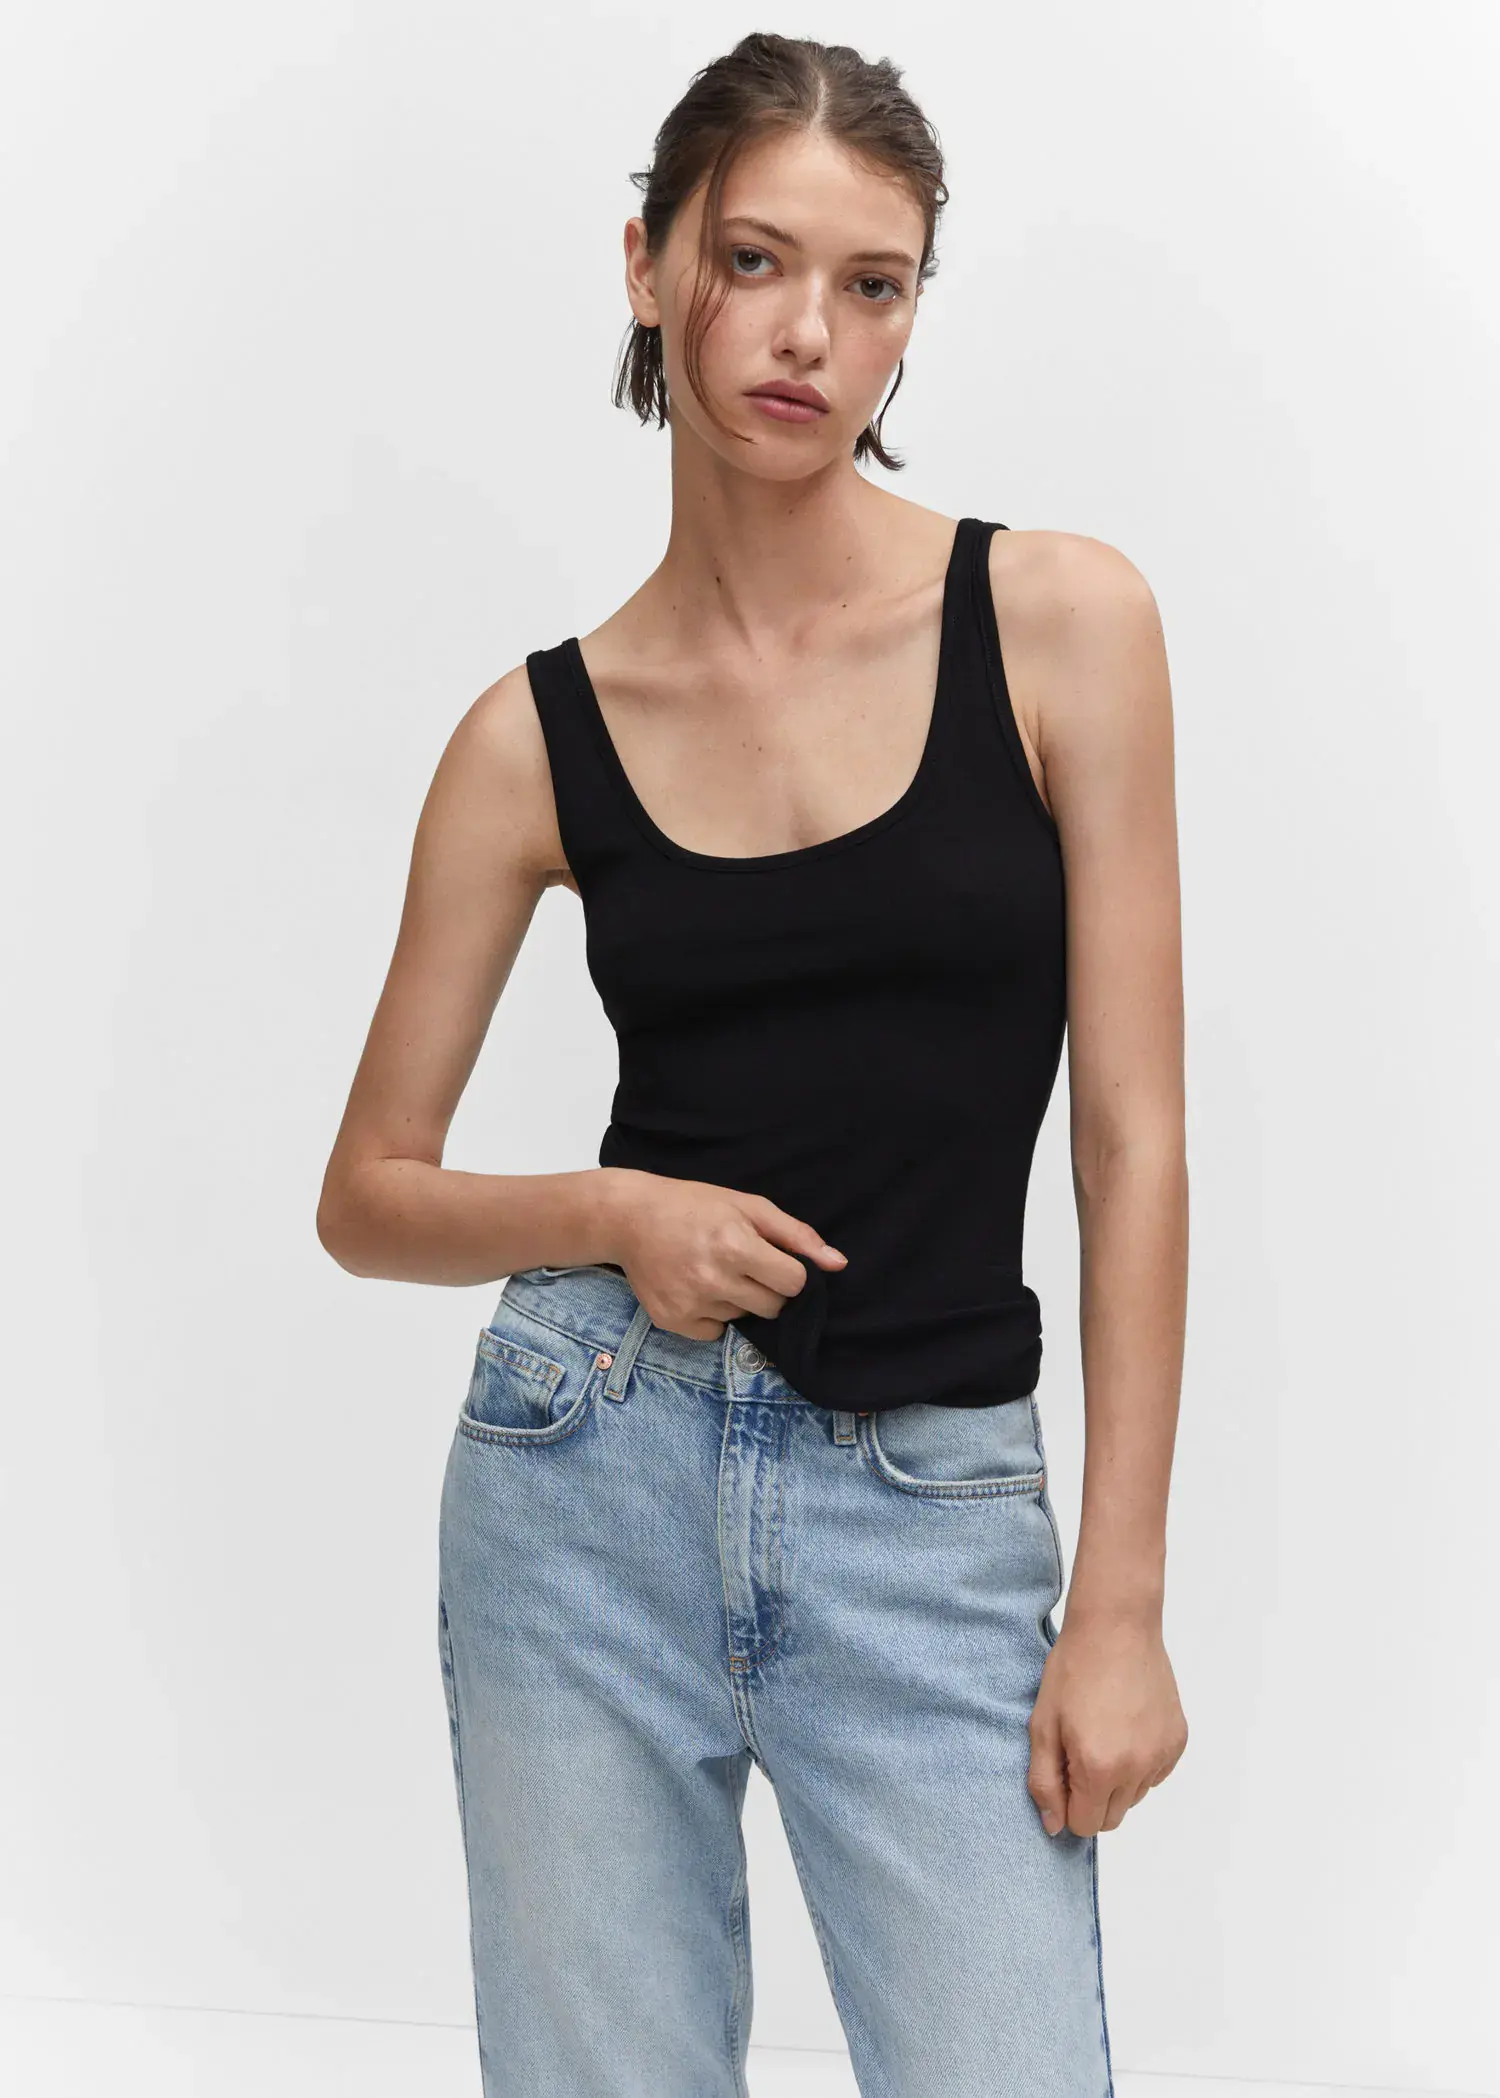 Mango Strapless halter neck top. a woman in black tank top and jeans. 